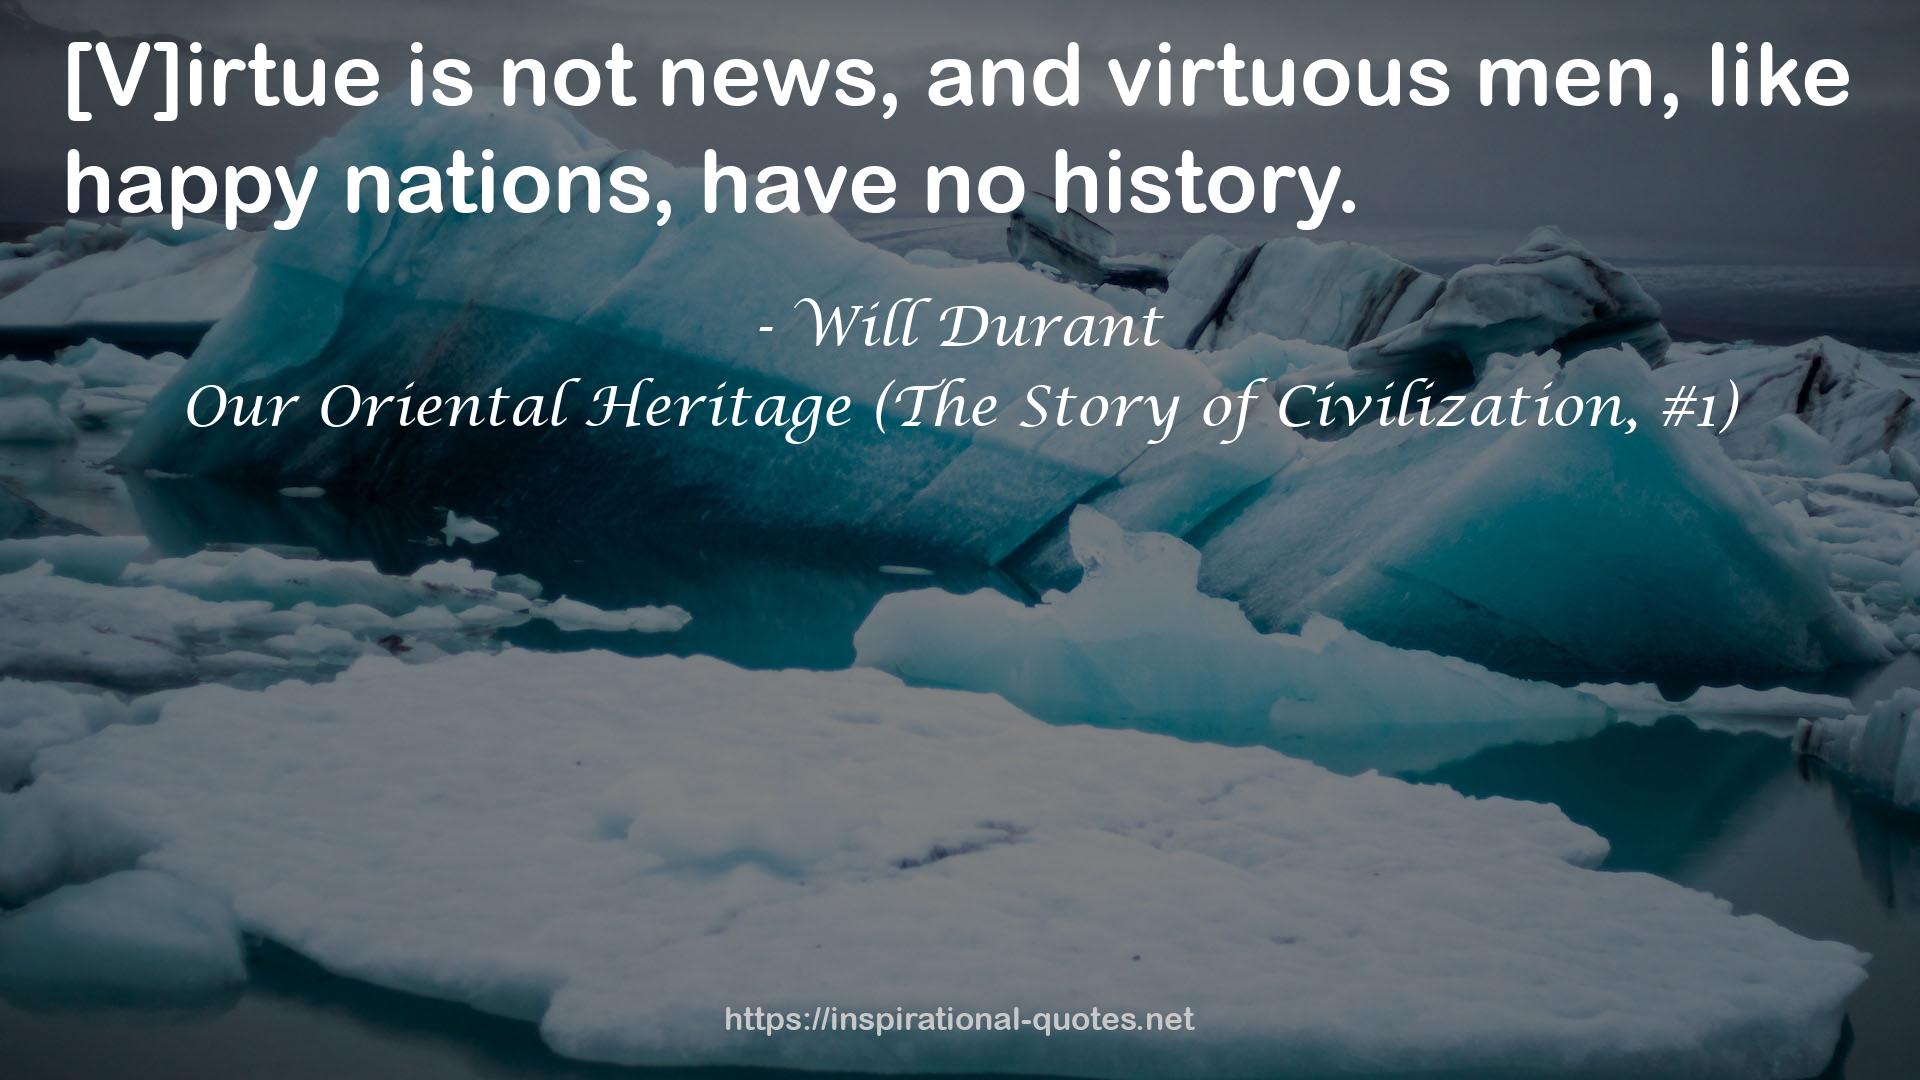 Our Oriental Heritage (The Story of Civilization, #1) QUOTES